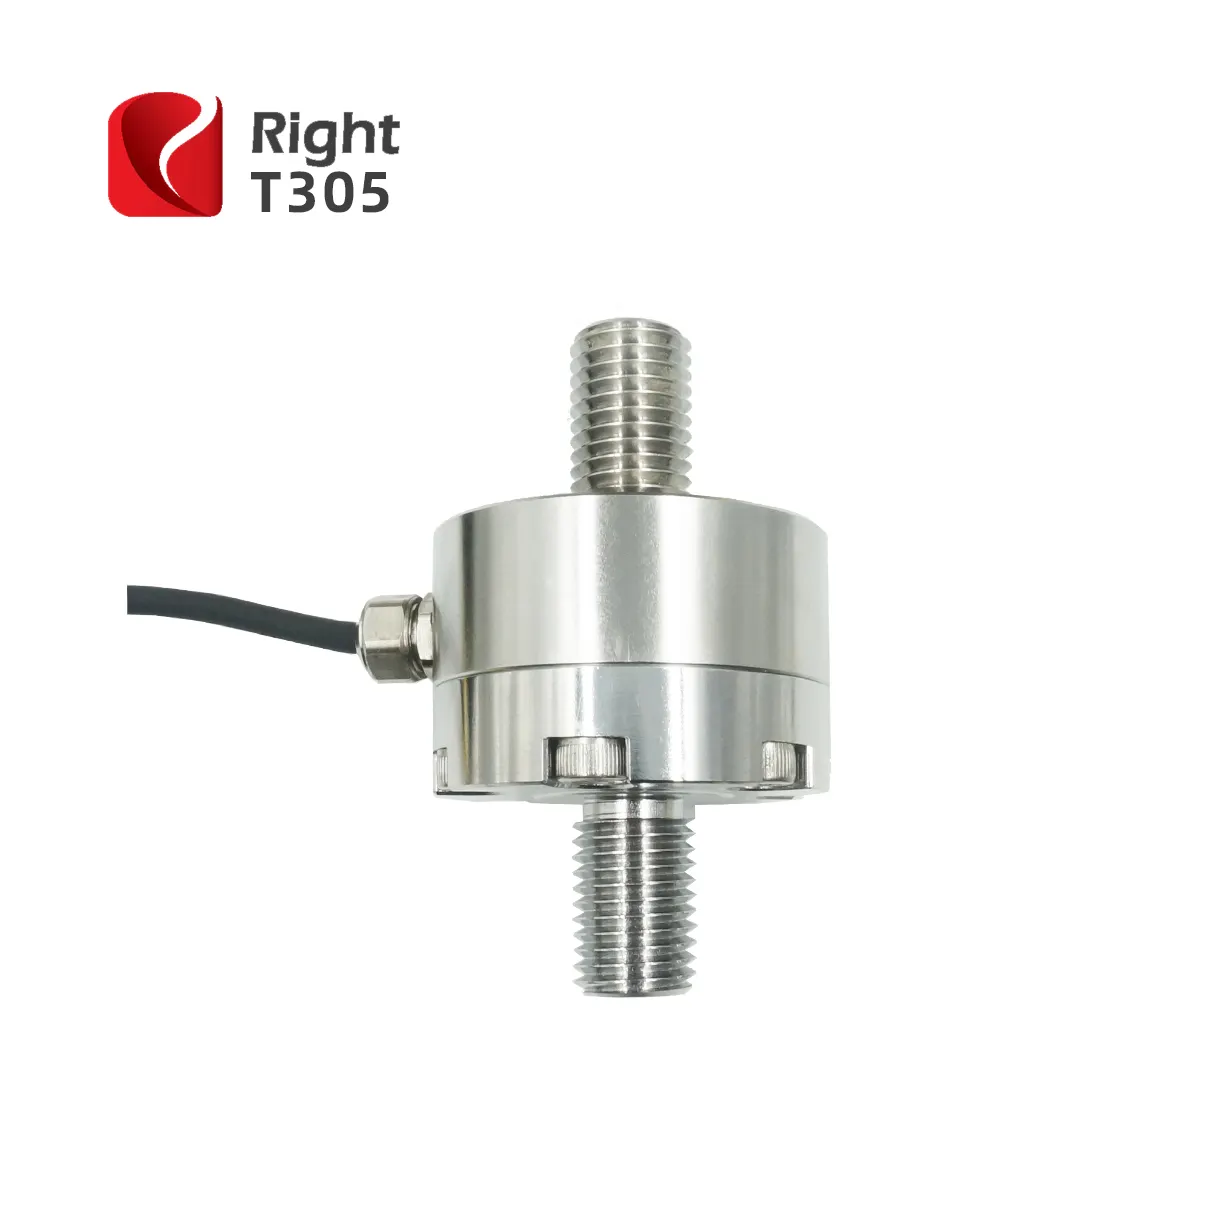 T305 Stainless Steel Automation Device 50kg Tension Compression Transducer Load Cell for Robotics